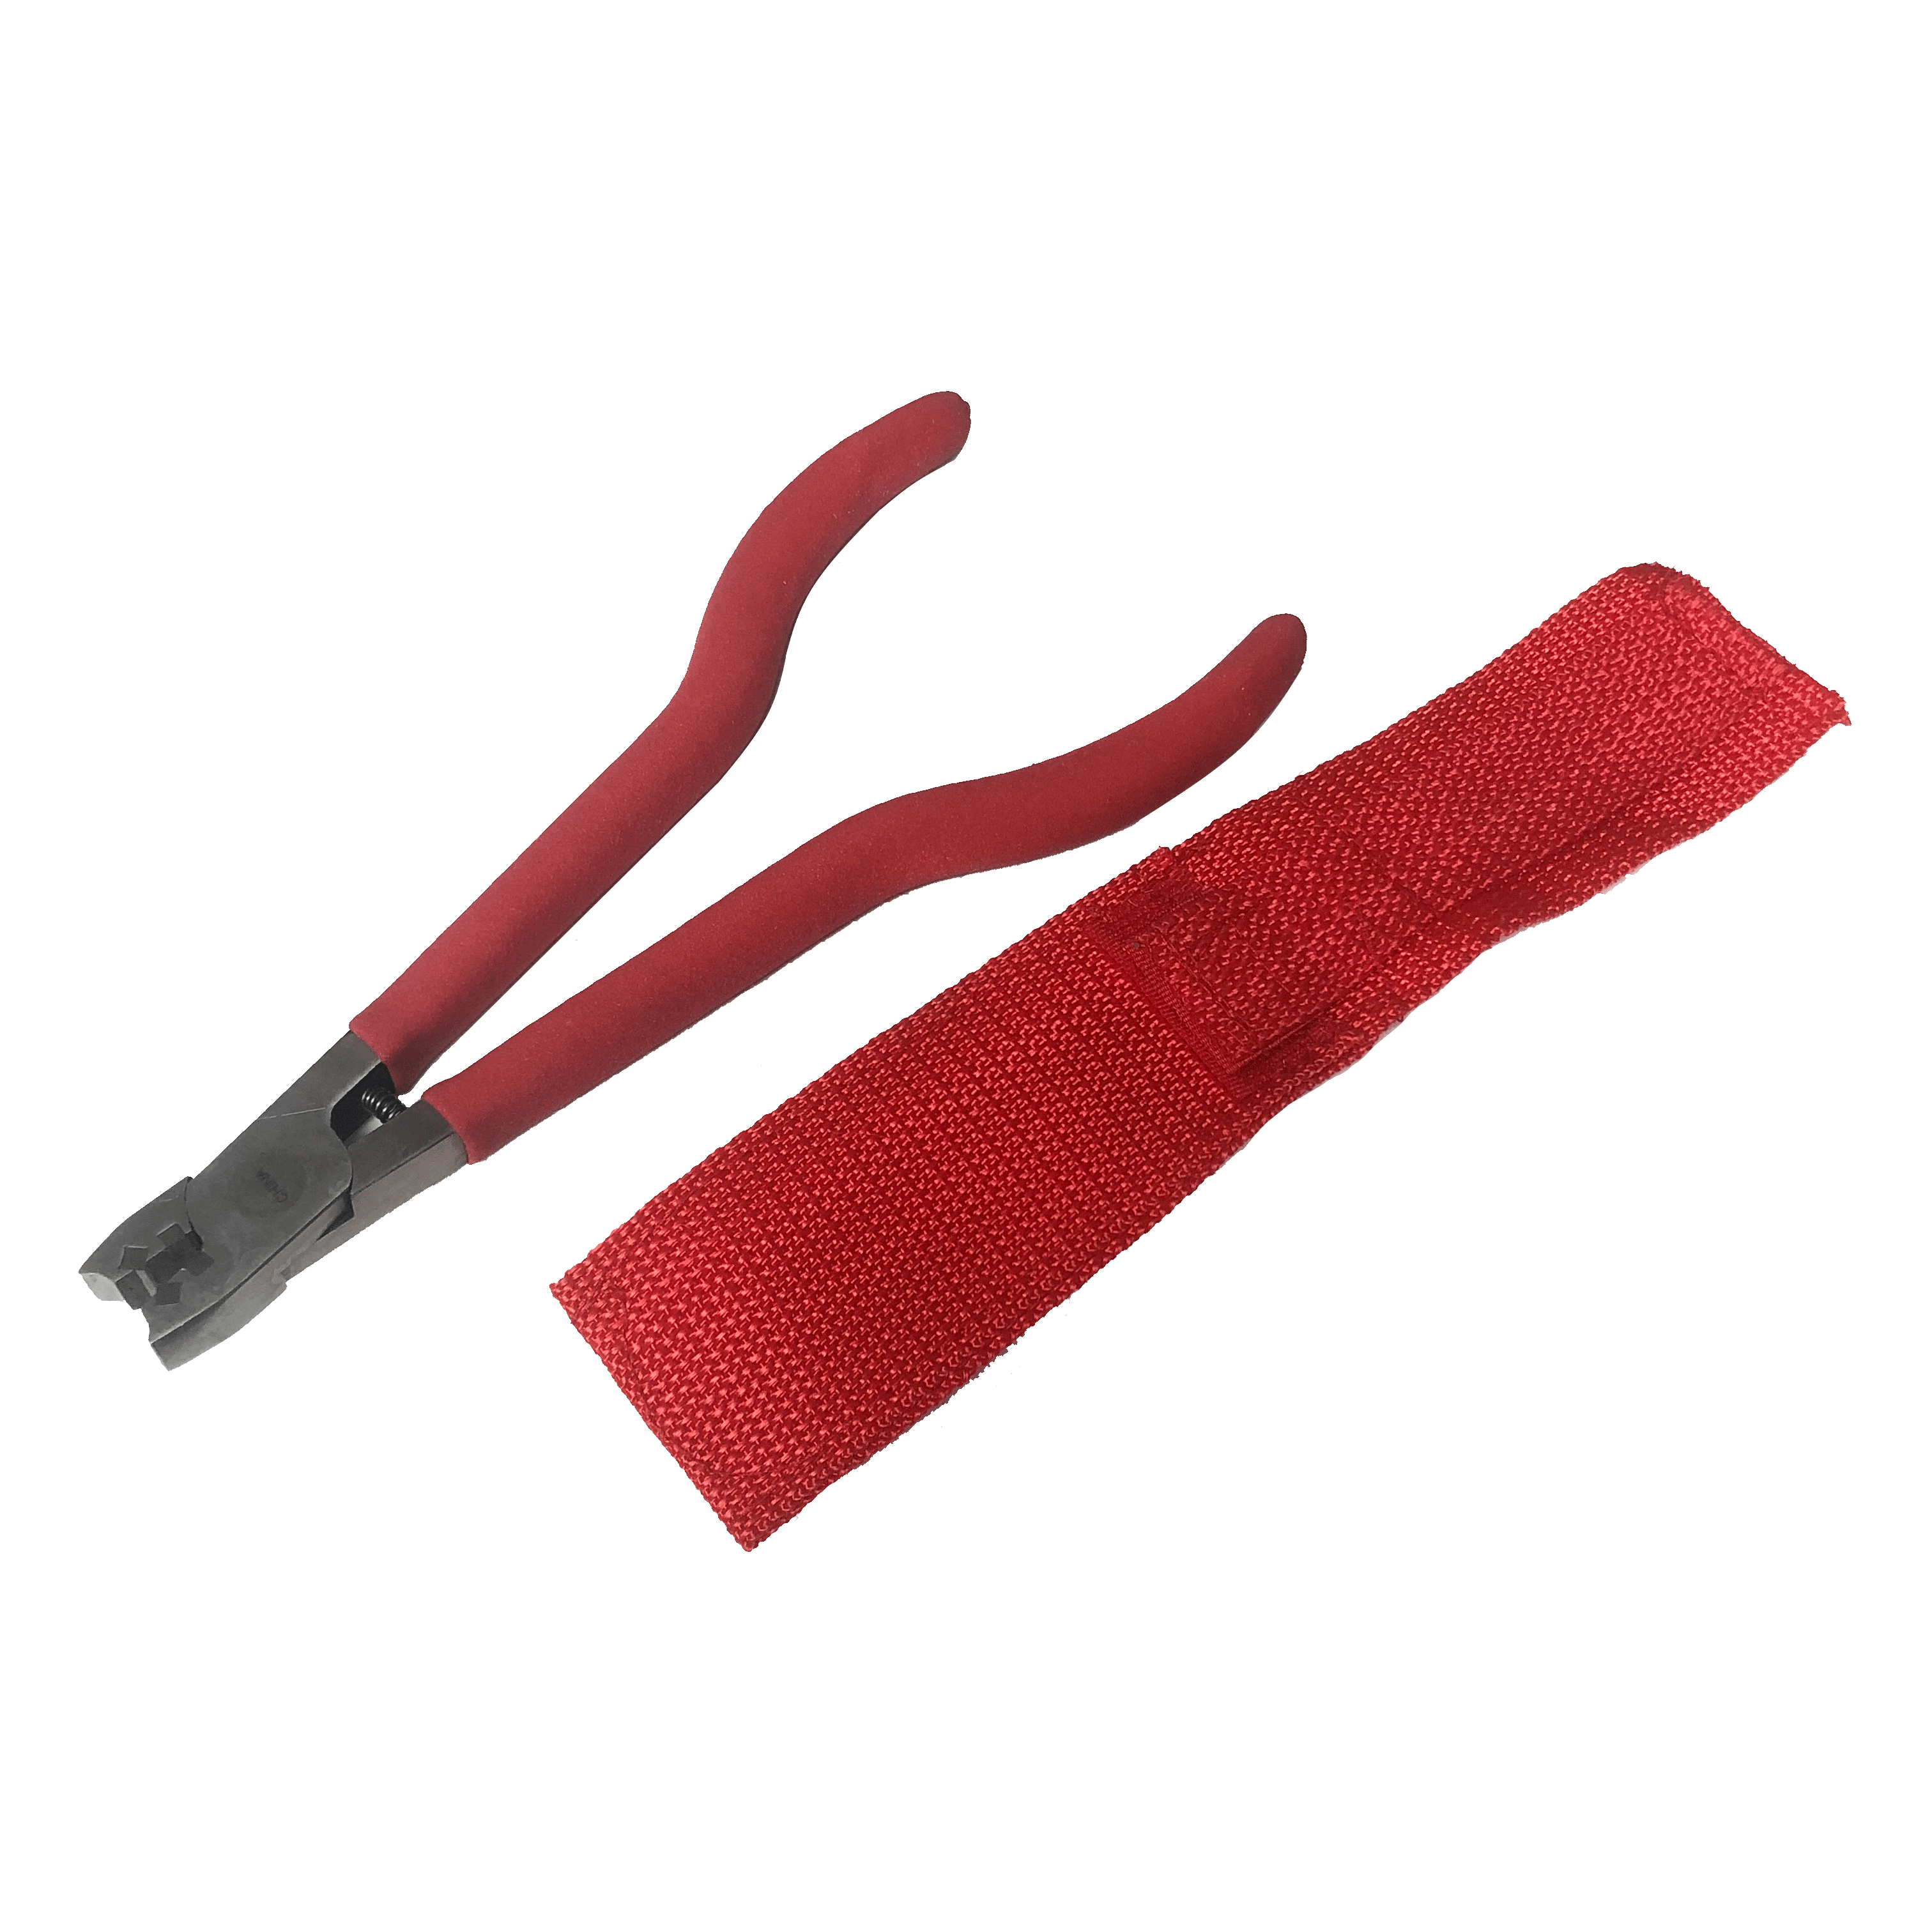 D-Barb, Cutting & Hook Remover For Fishing